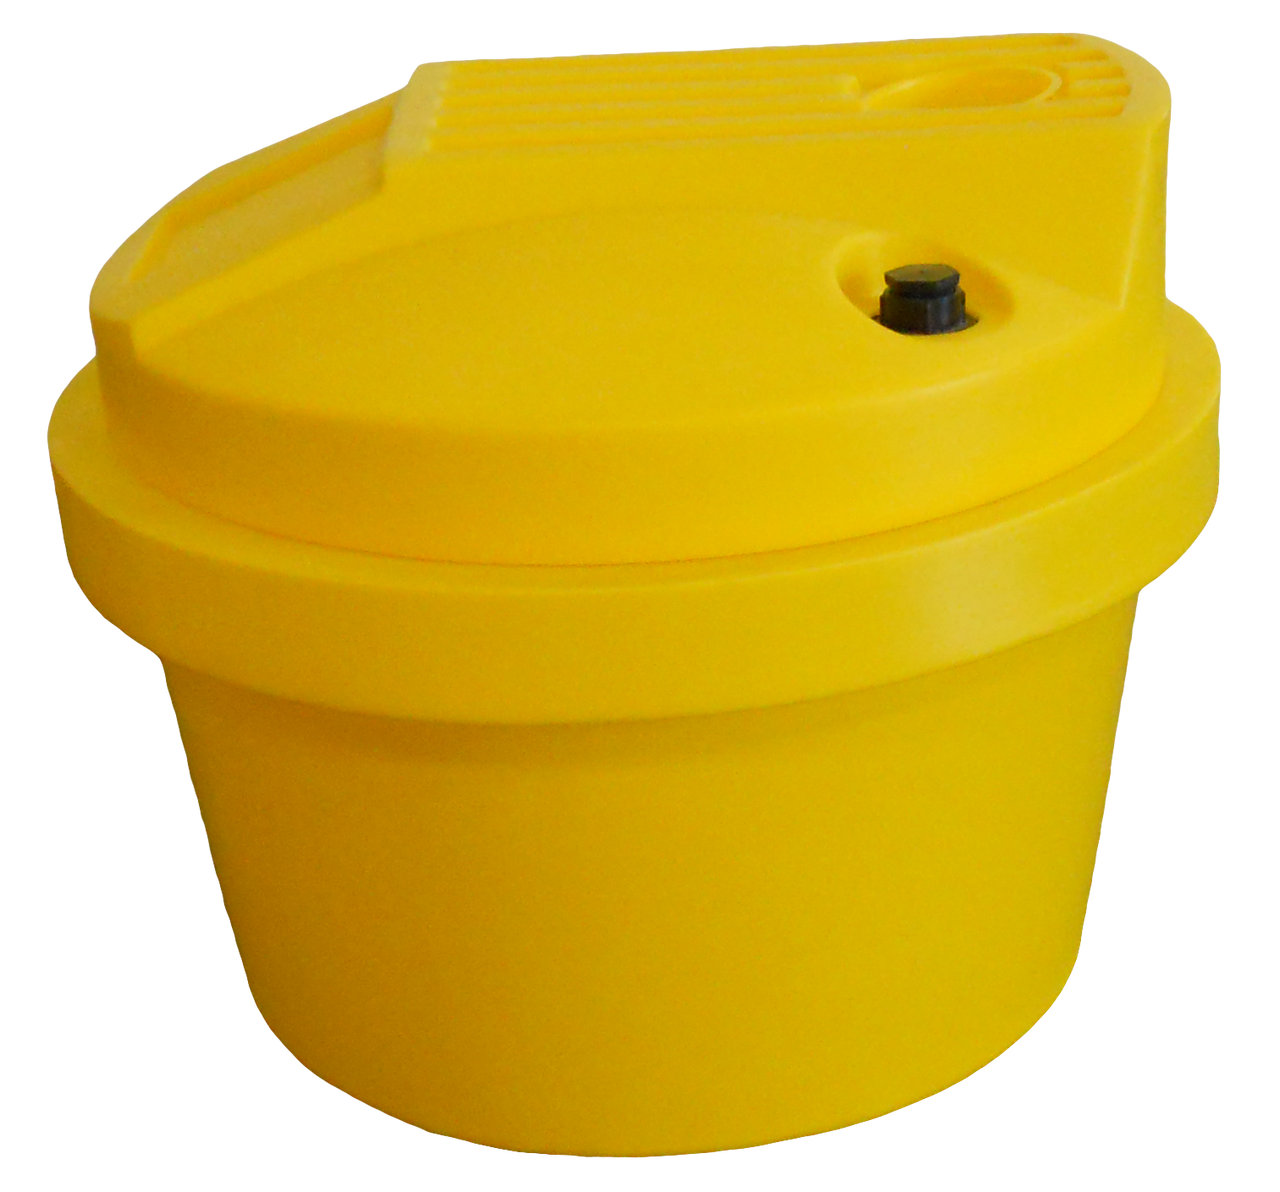 30 Gal Aquarius Tapered Chemical Feed Tank - LPE 1.9 - 5/16" Wall - Yellow